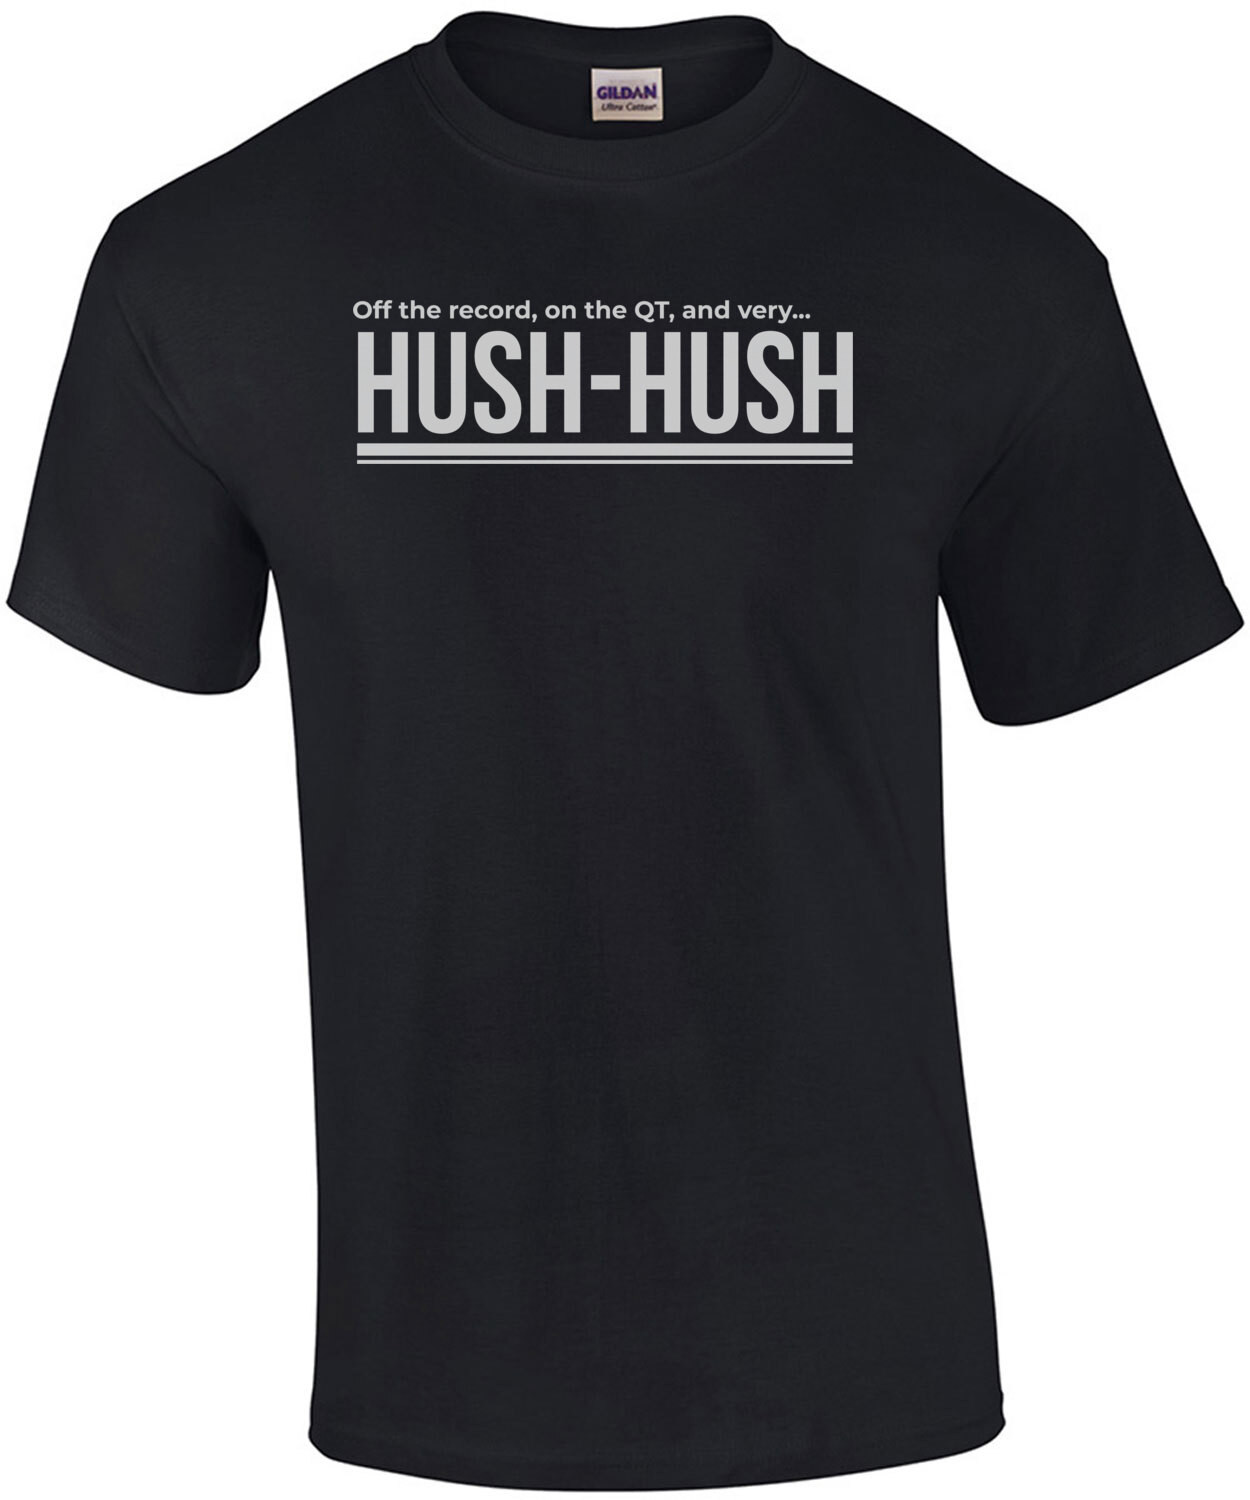 Off the record, on the QT, and very.. hush-hush - L.A. Confidential - 90's T-Shirt